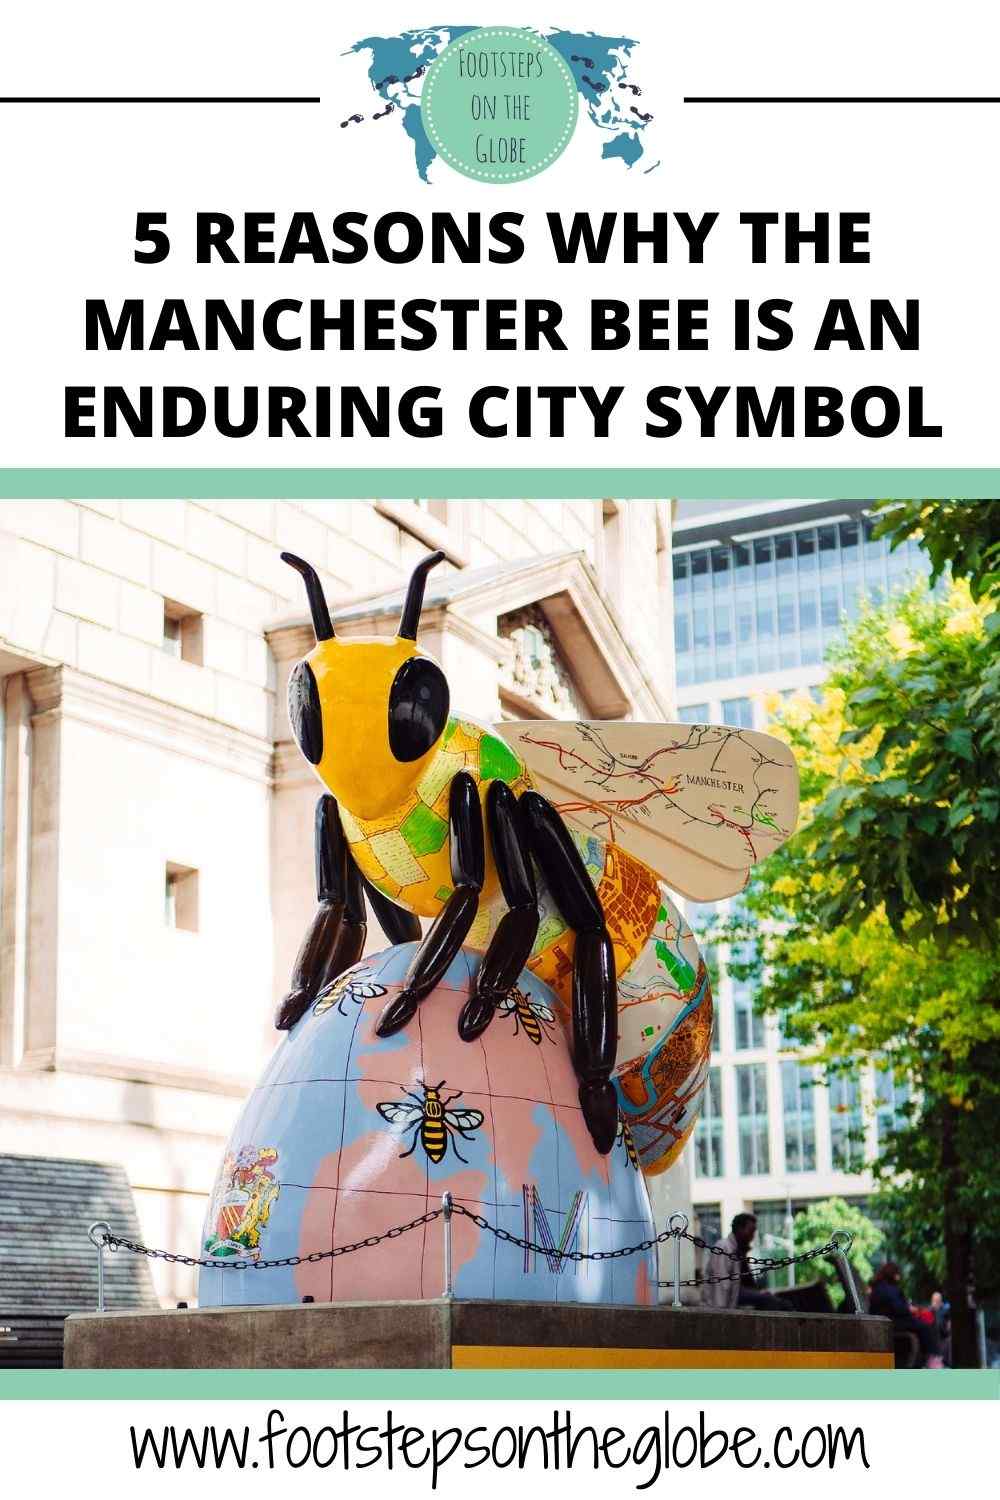 Pinterest image of a Manchester bee statue in Manchester city centre with the text: "5 Reasons-why the Manchester bee is an enduring city symbol bombing memorial"